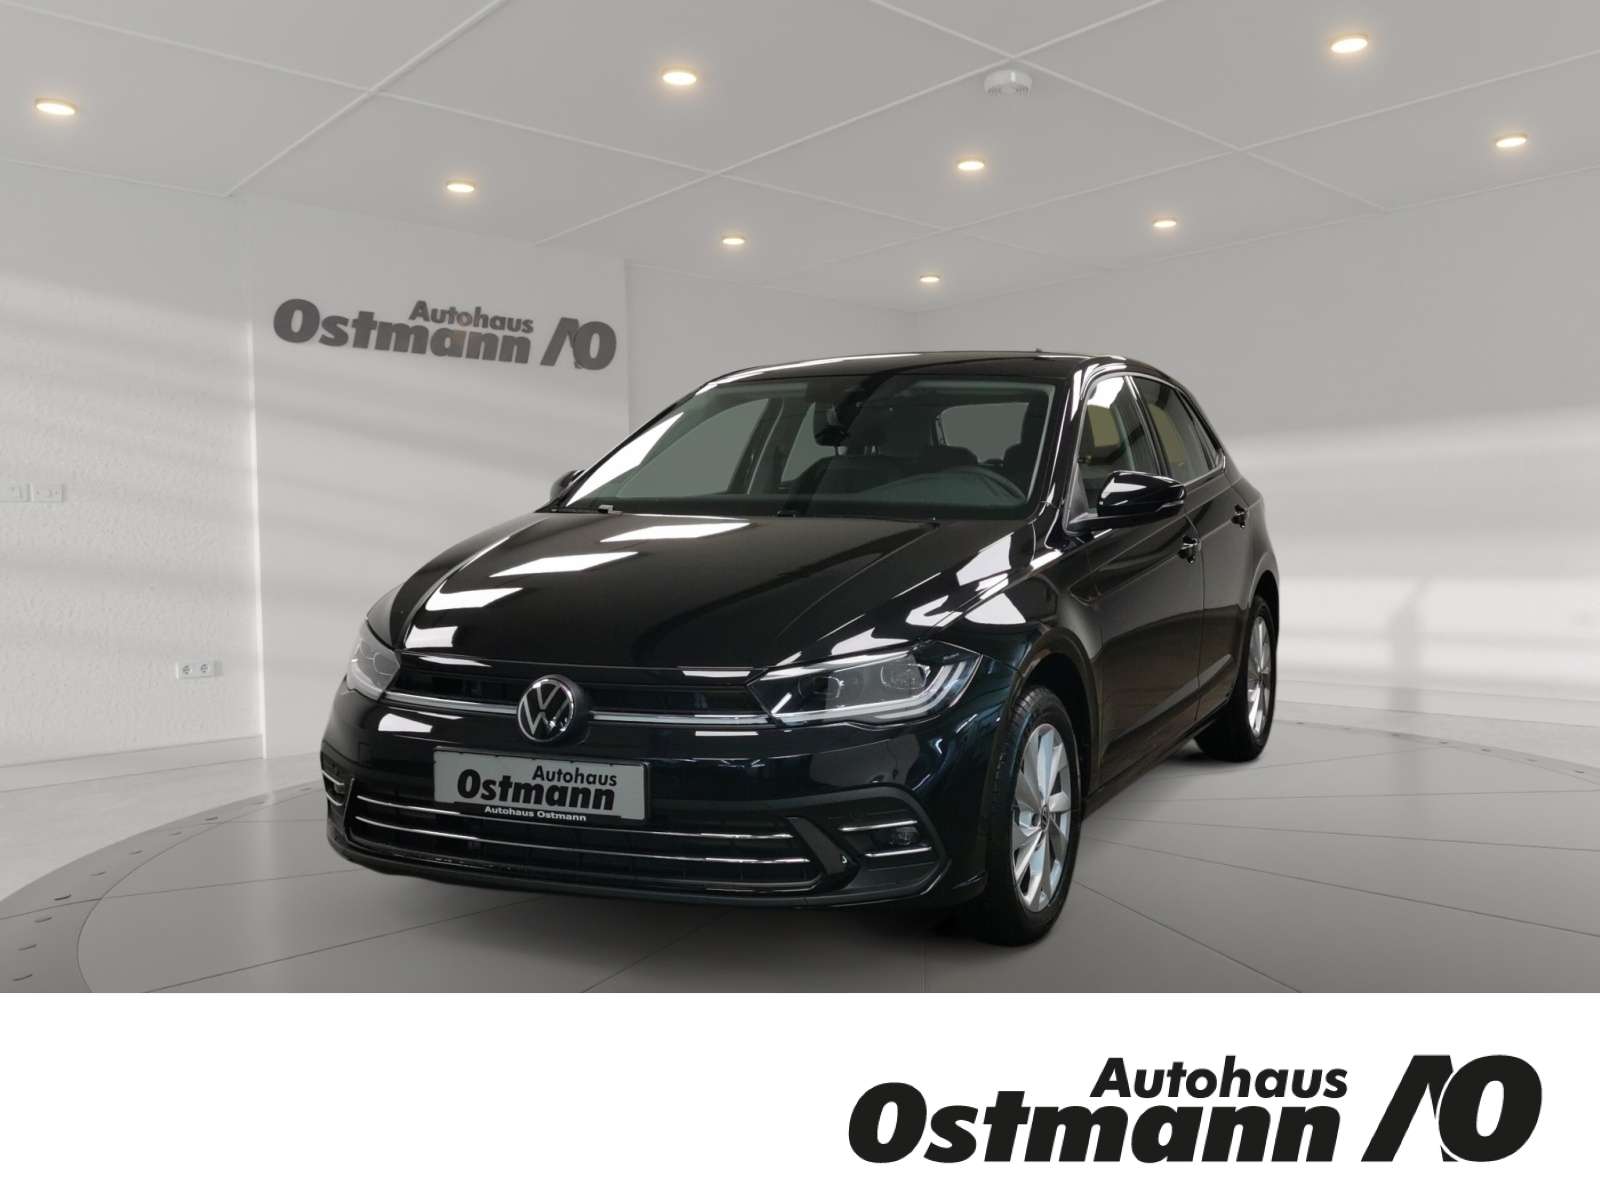 Volkswagen Polo Compact in Black pre-registered in Wolfhagen for € 99,999.-